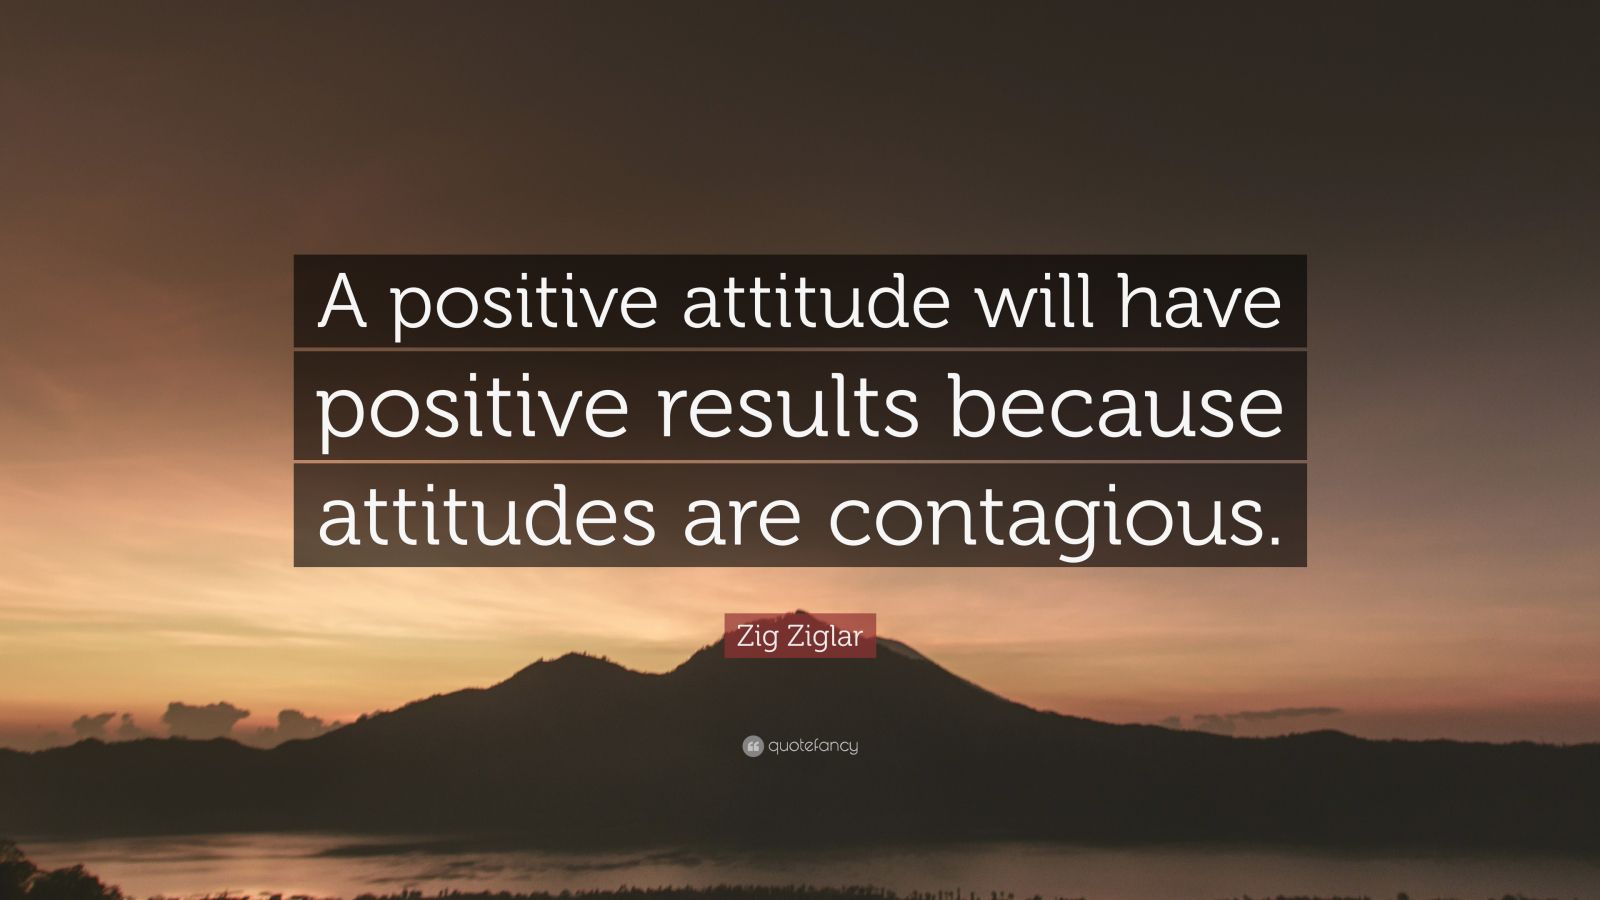 Zig Ziglar Quote: “A positive attitude will have positive results